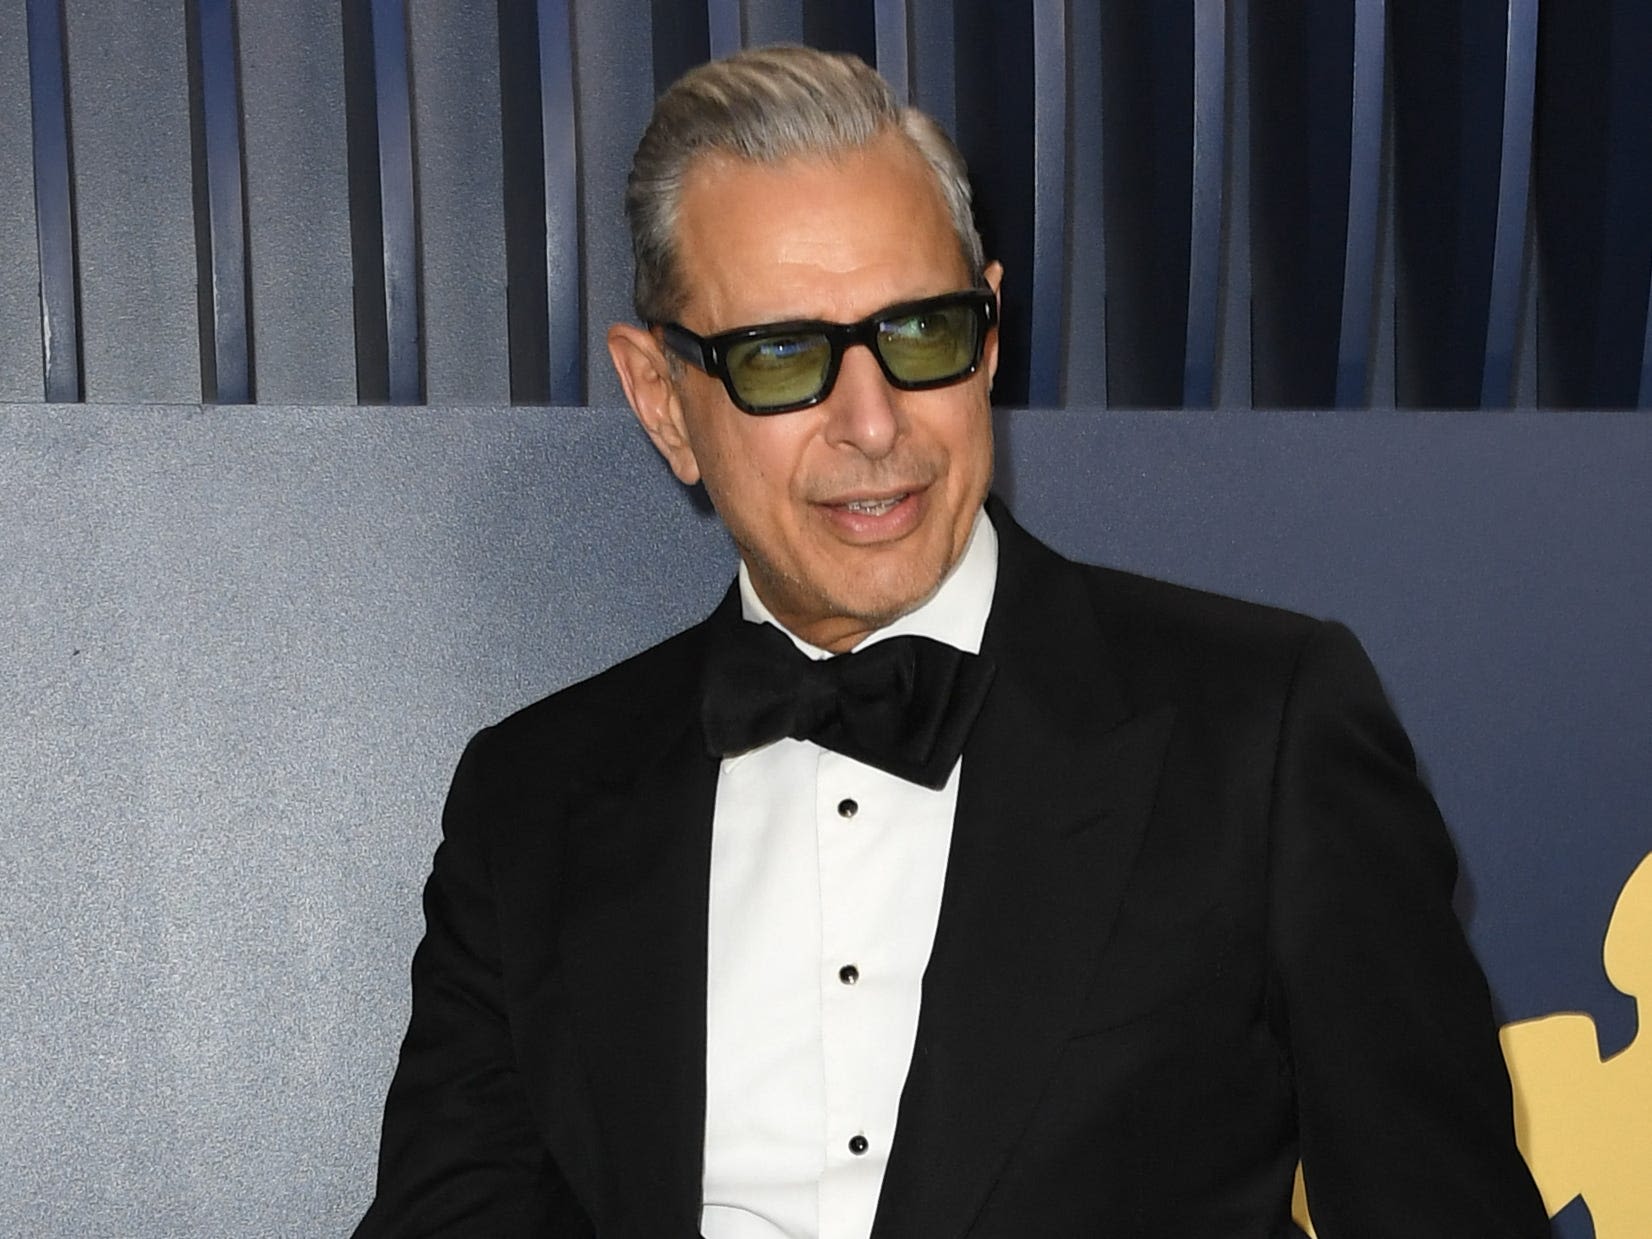 Jeff Goldblum wants his kids to get jobs and support themselves financially when they're older: 'I'm not going to do it for you'